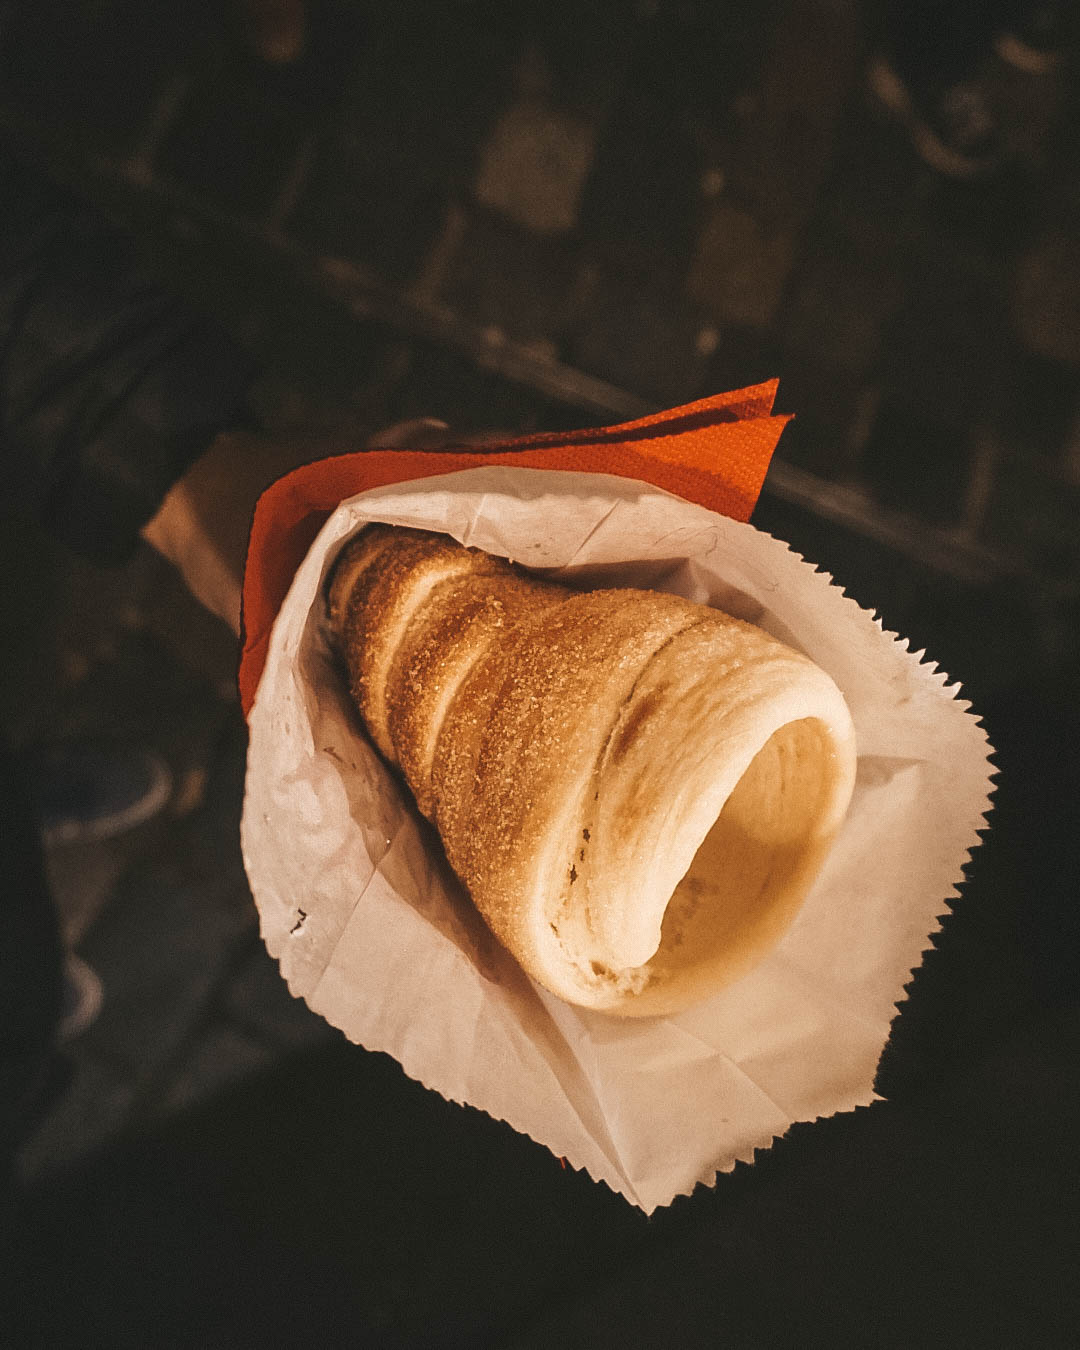 A chimney cake from one of Dresden's Christmas markets.